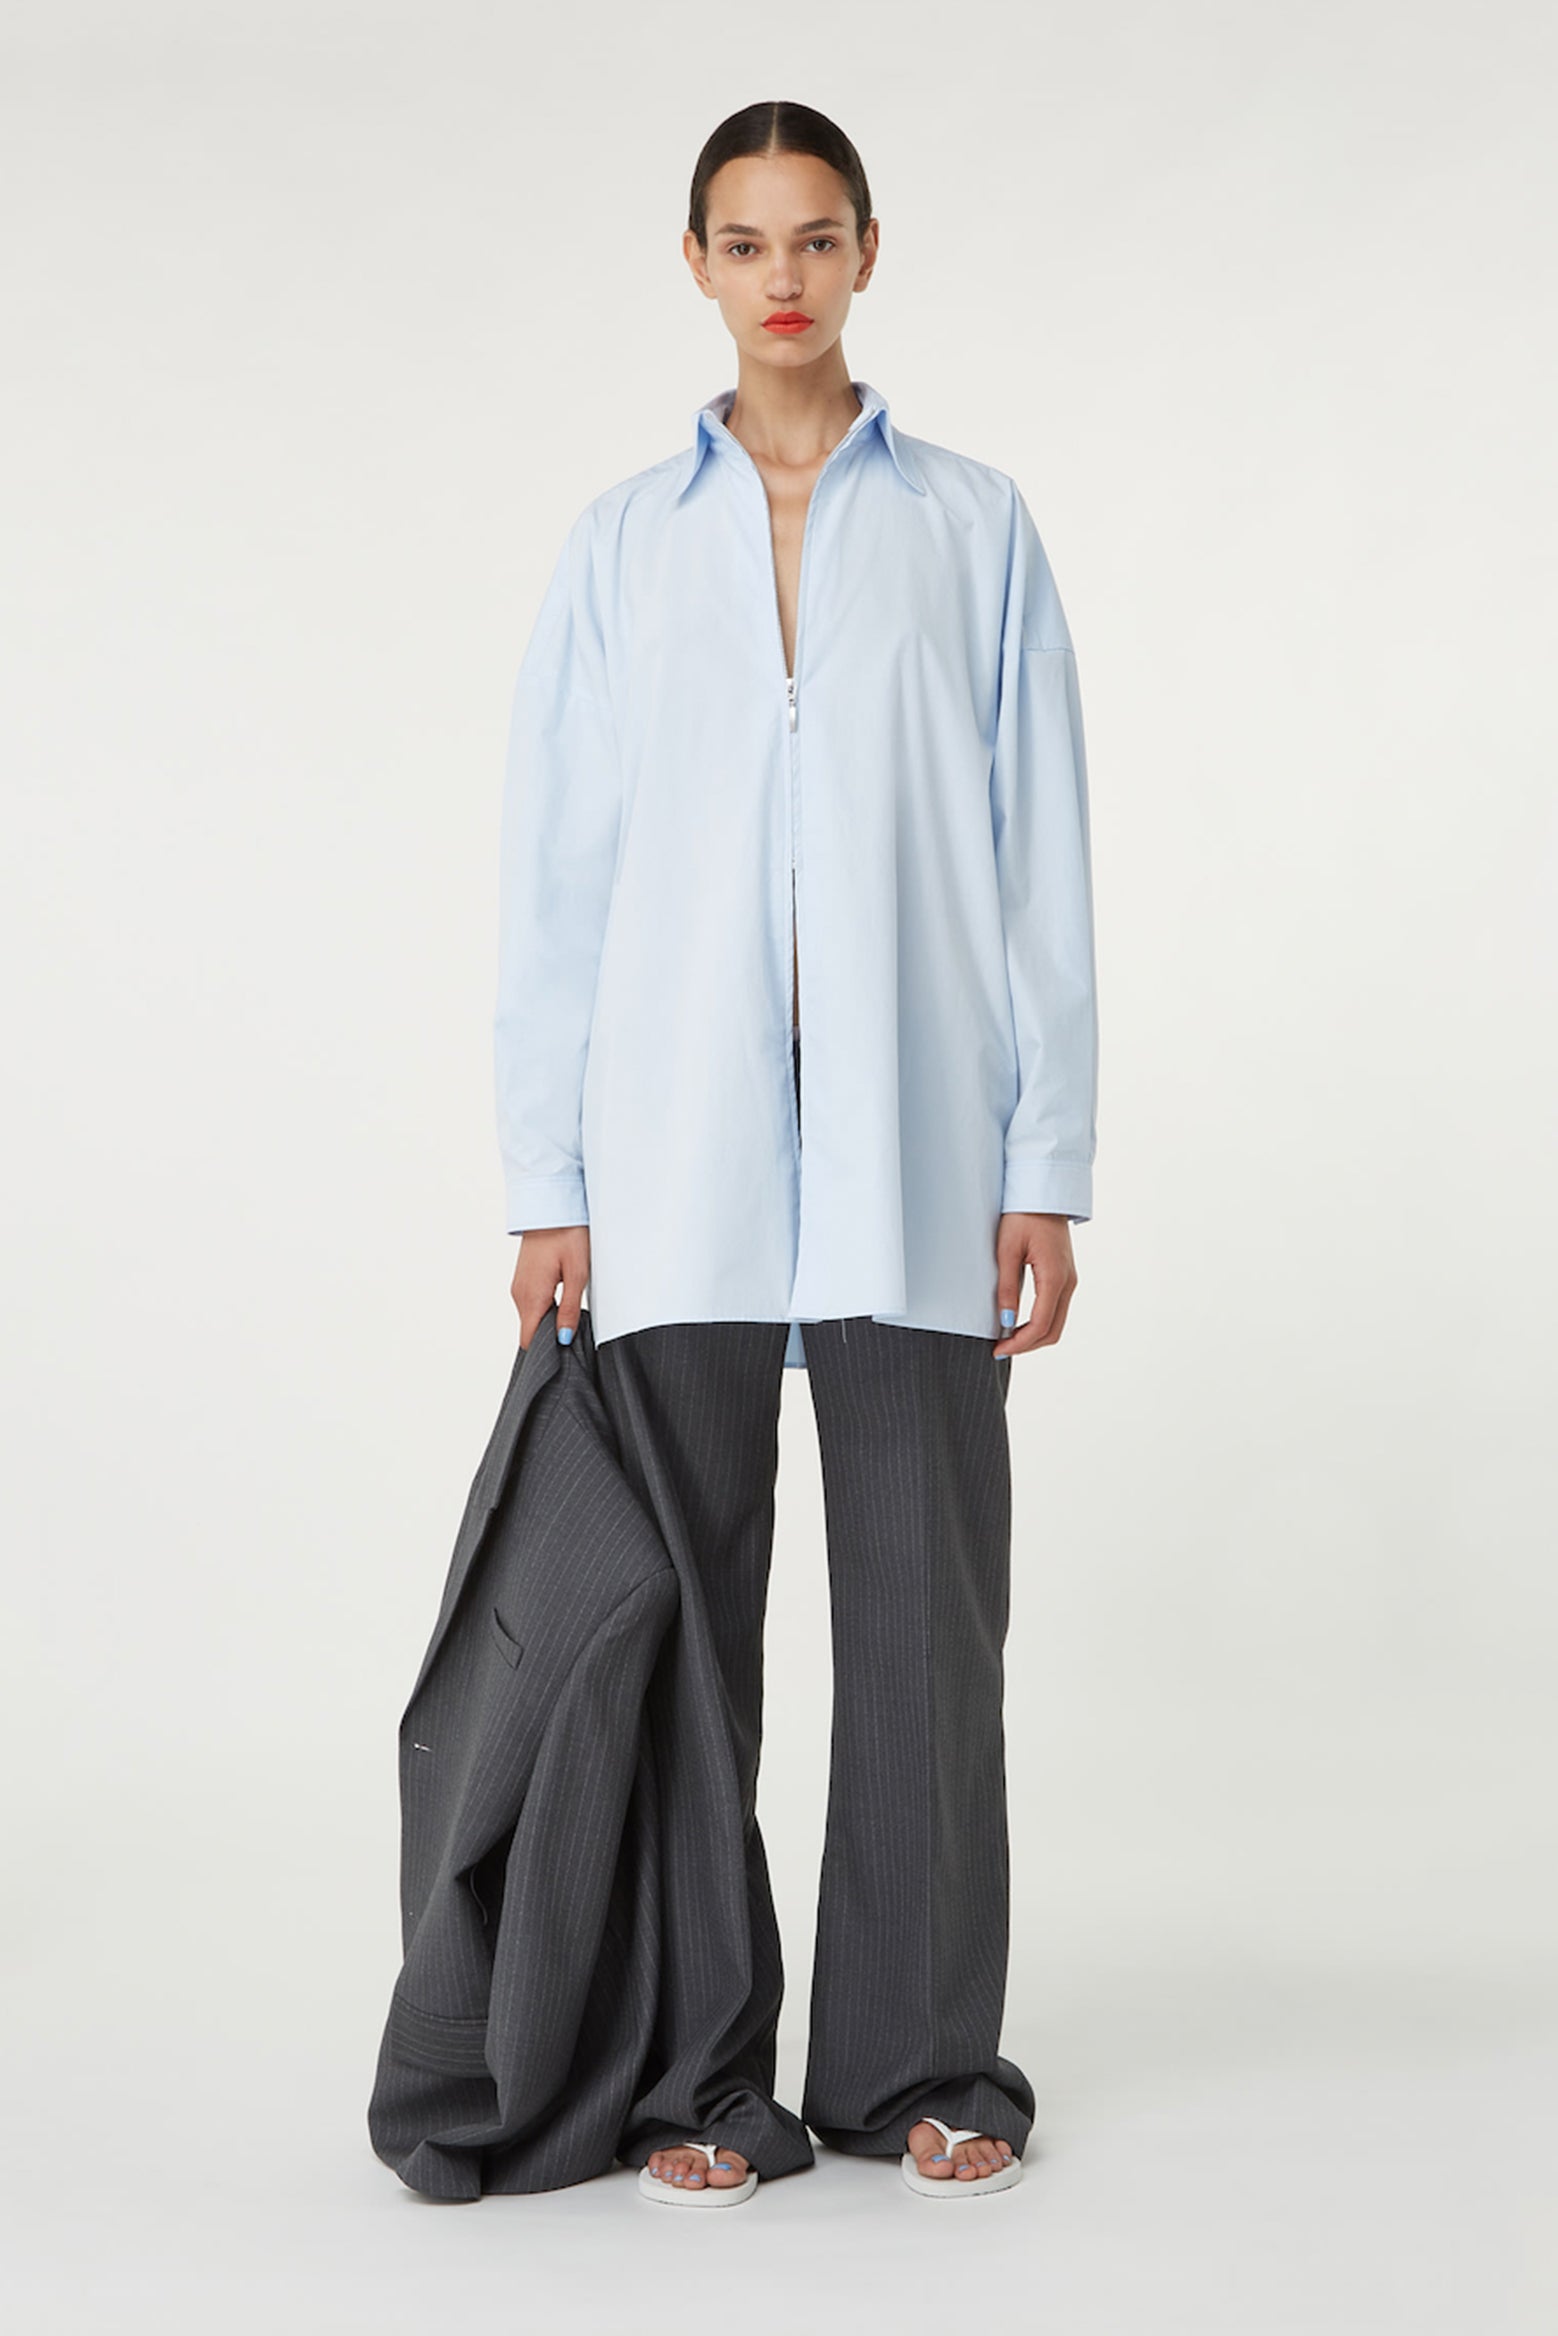 Gauge81 Cosala Shirt in Gust available at The New Trend Australia.